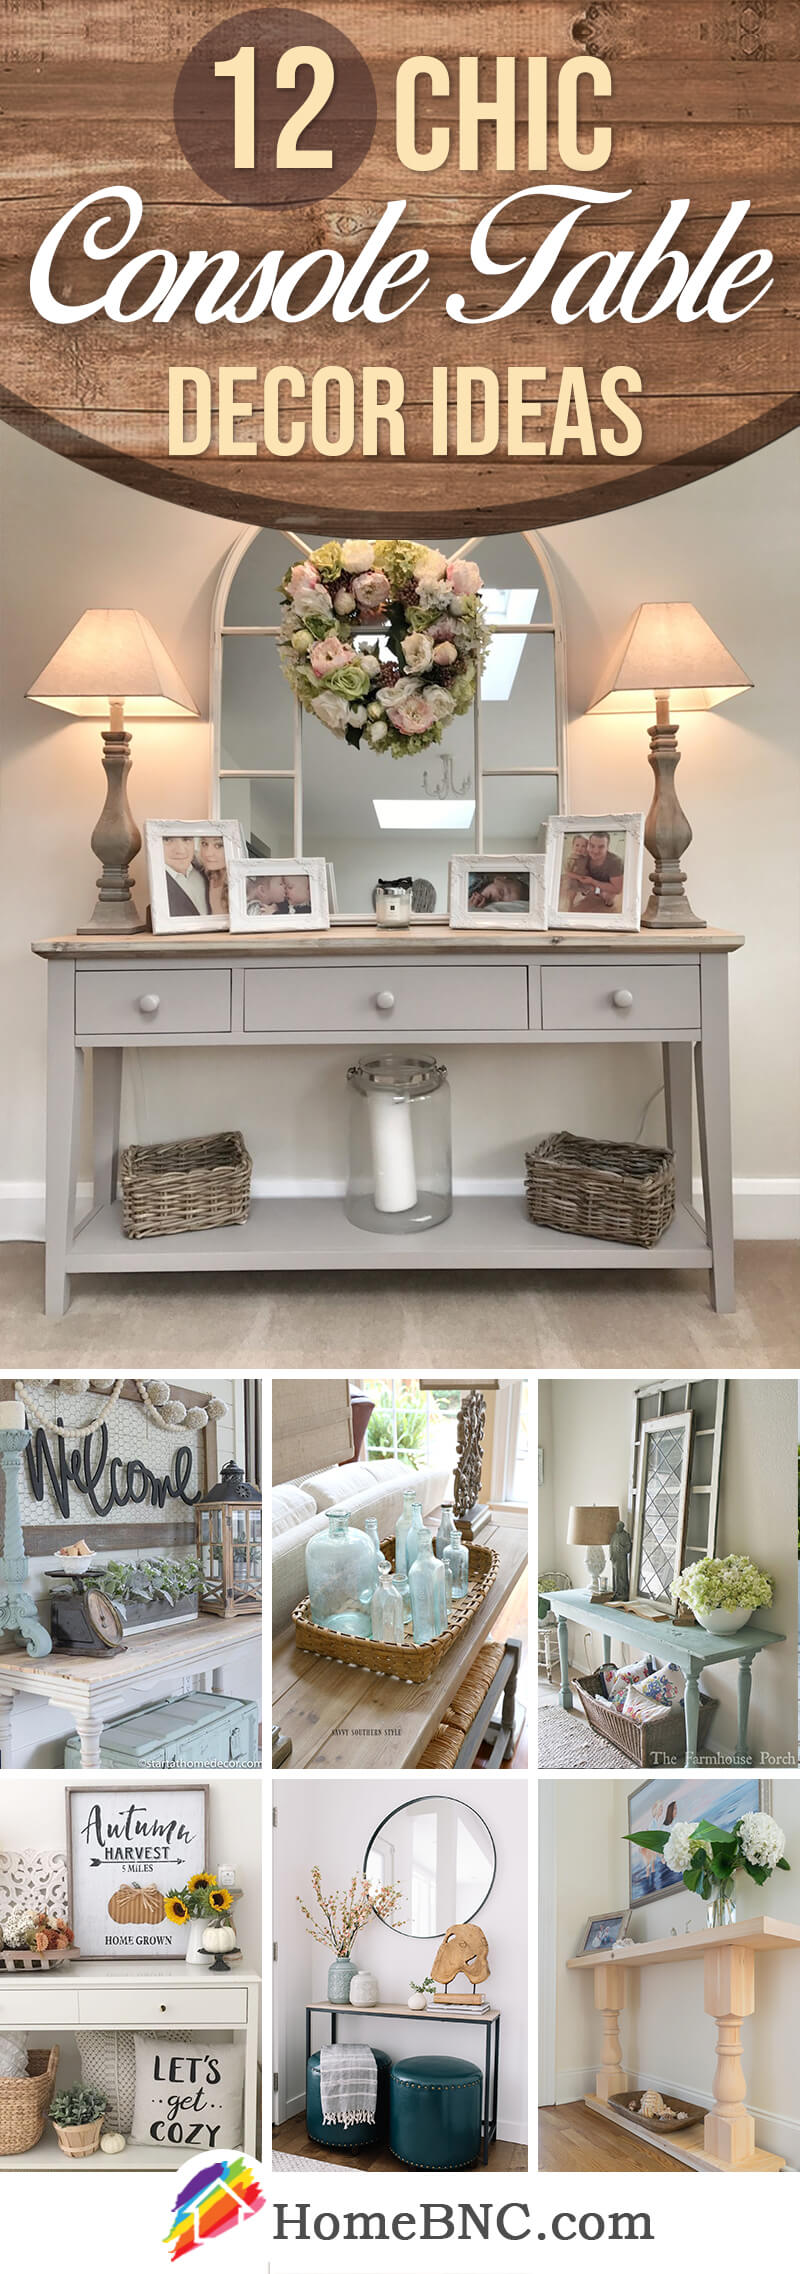 Console Table Decorating Ideas